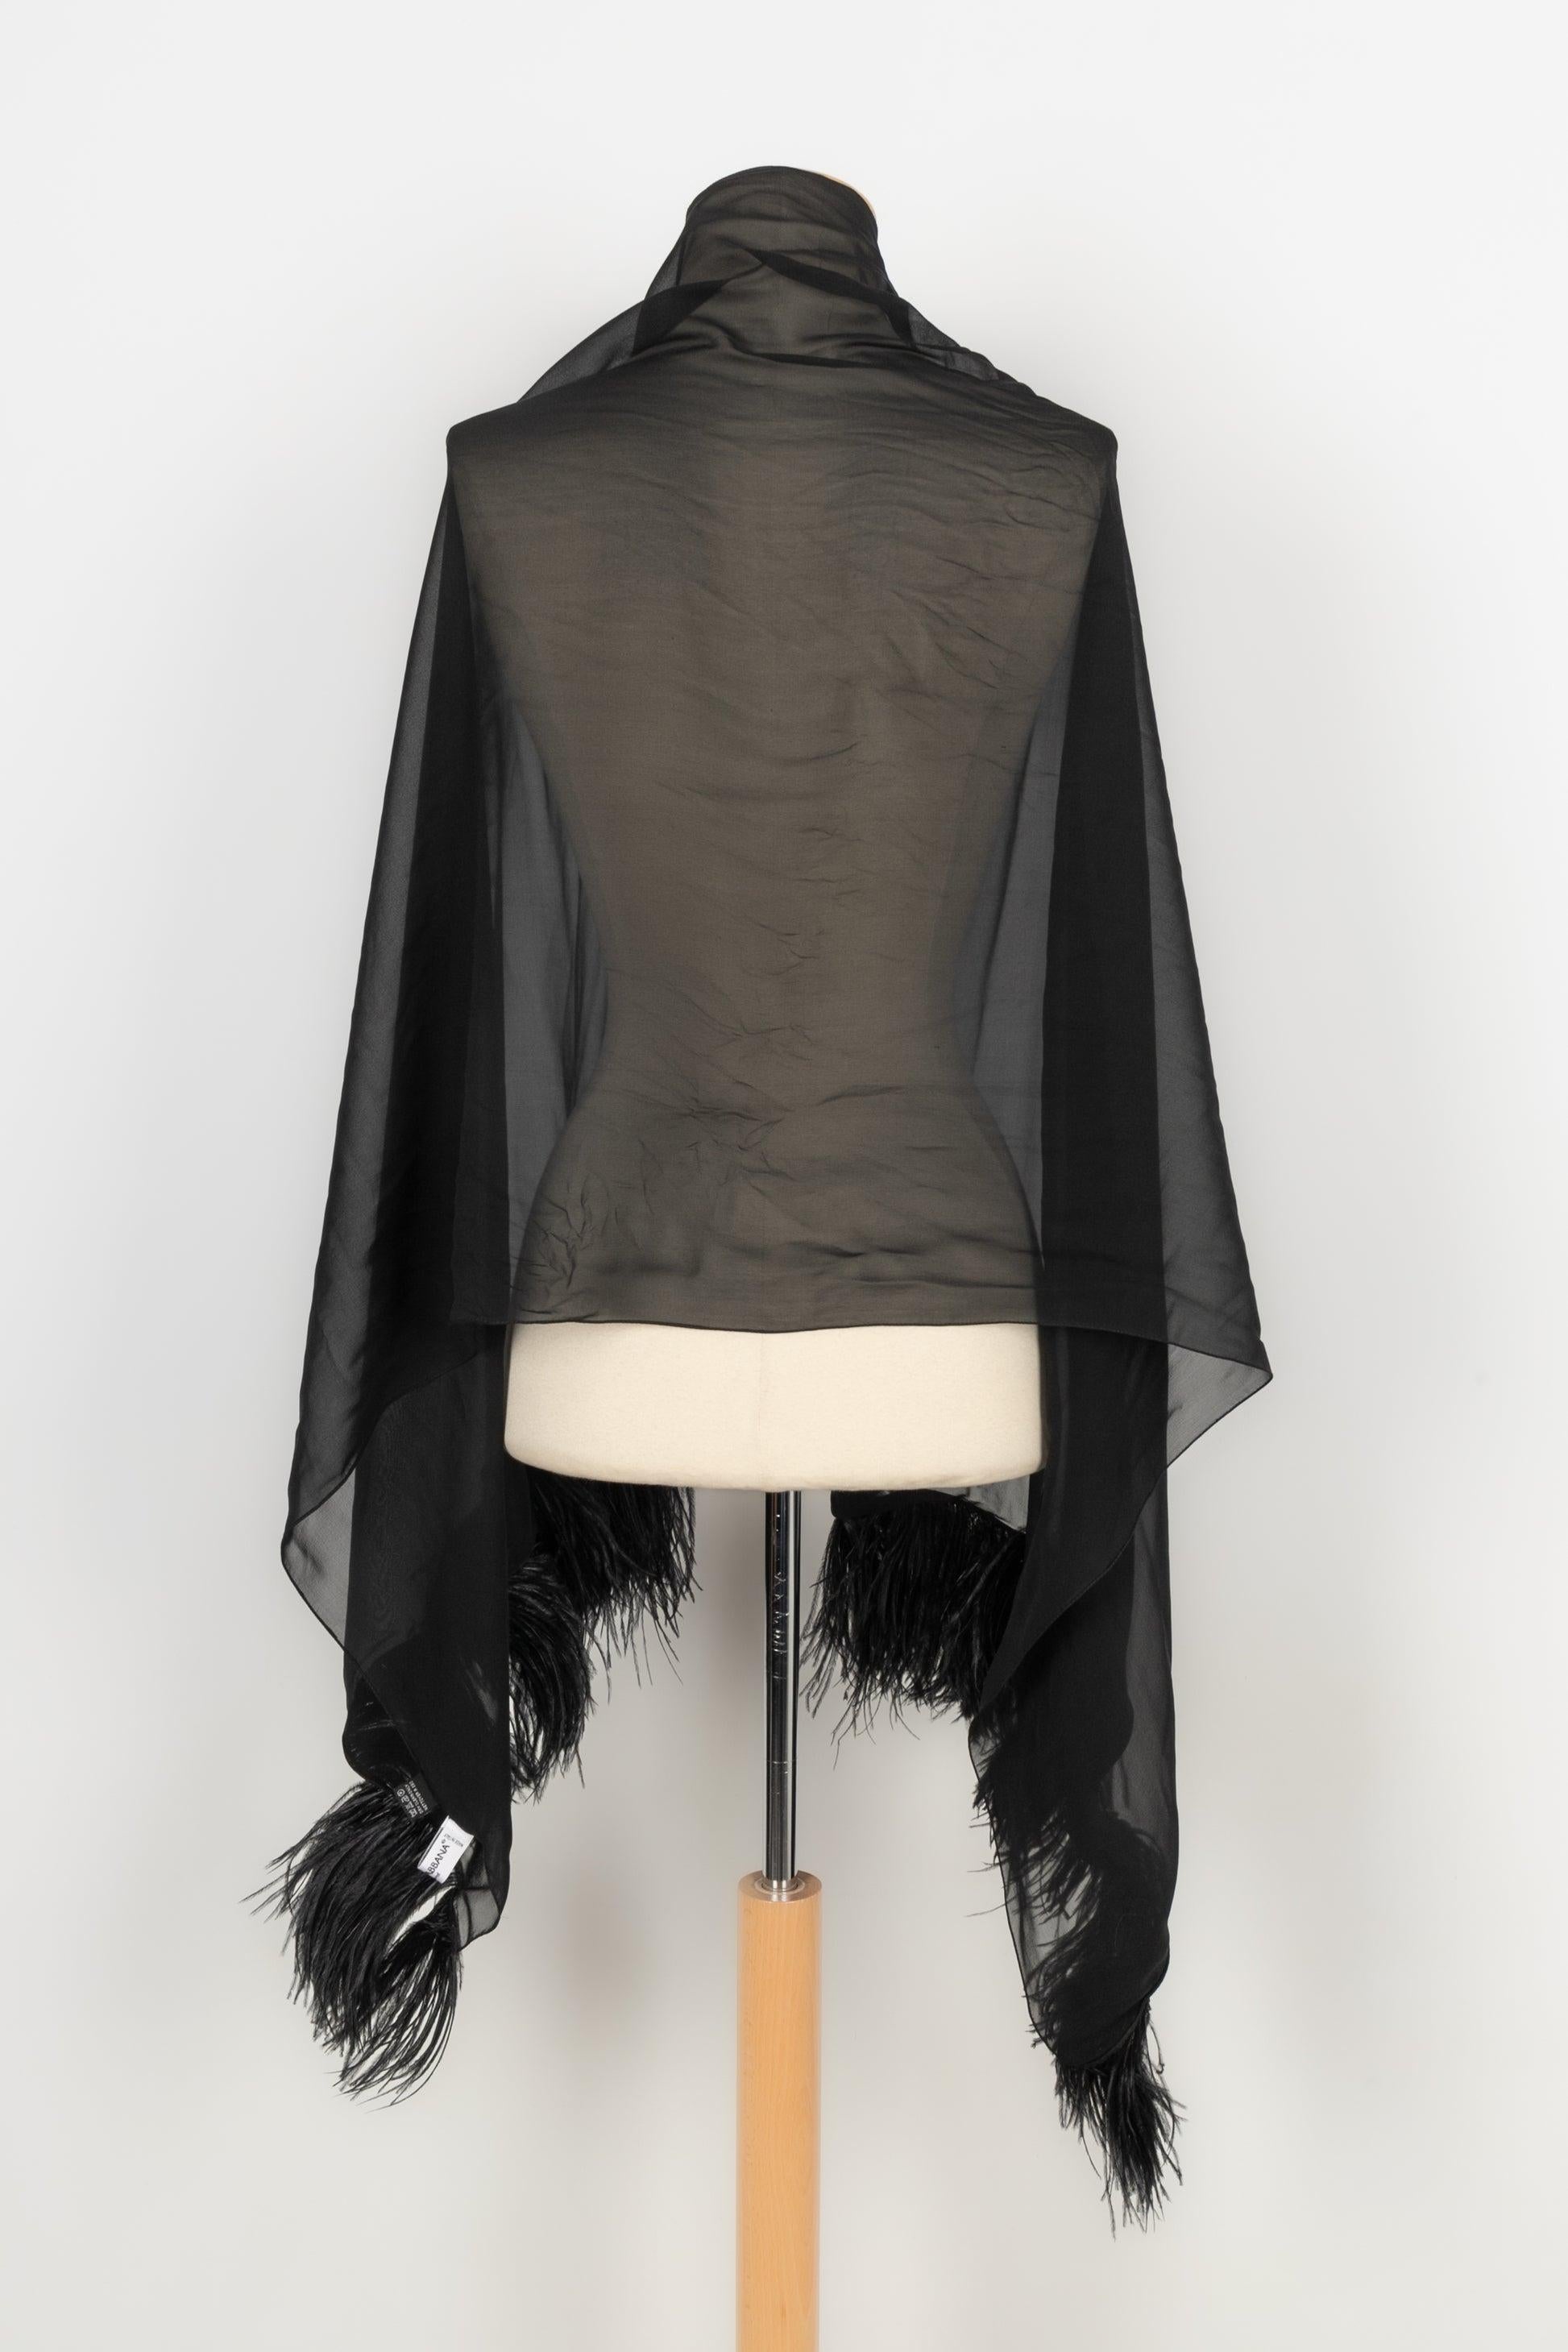 Dolce & Gabbana Feather and Black Silk Blouse 3